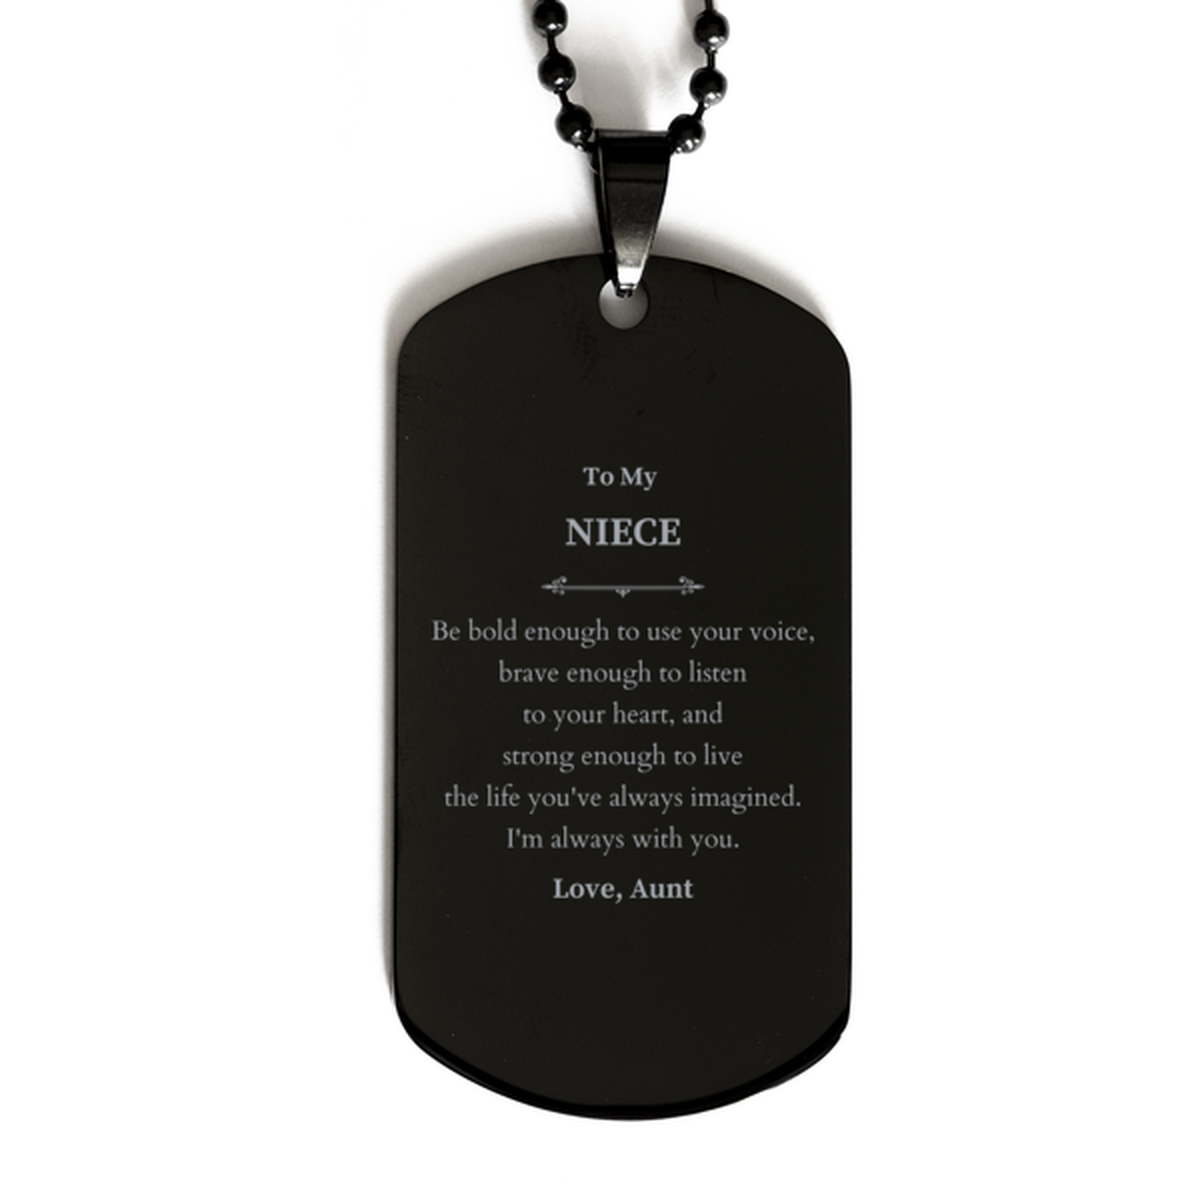 Keepsake Niece Black Dog Tag Gift Idea Graduation Christmas Birthday Niece from Aunt, Niece Be bold enough to use your voice, brave enough to listen to your heart. Love, Aunt